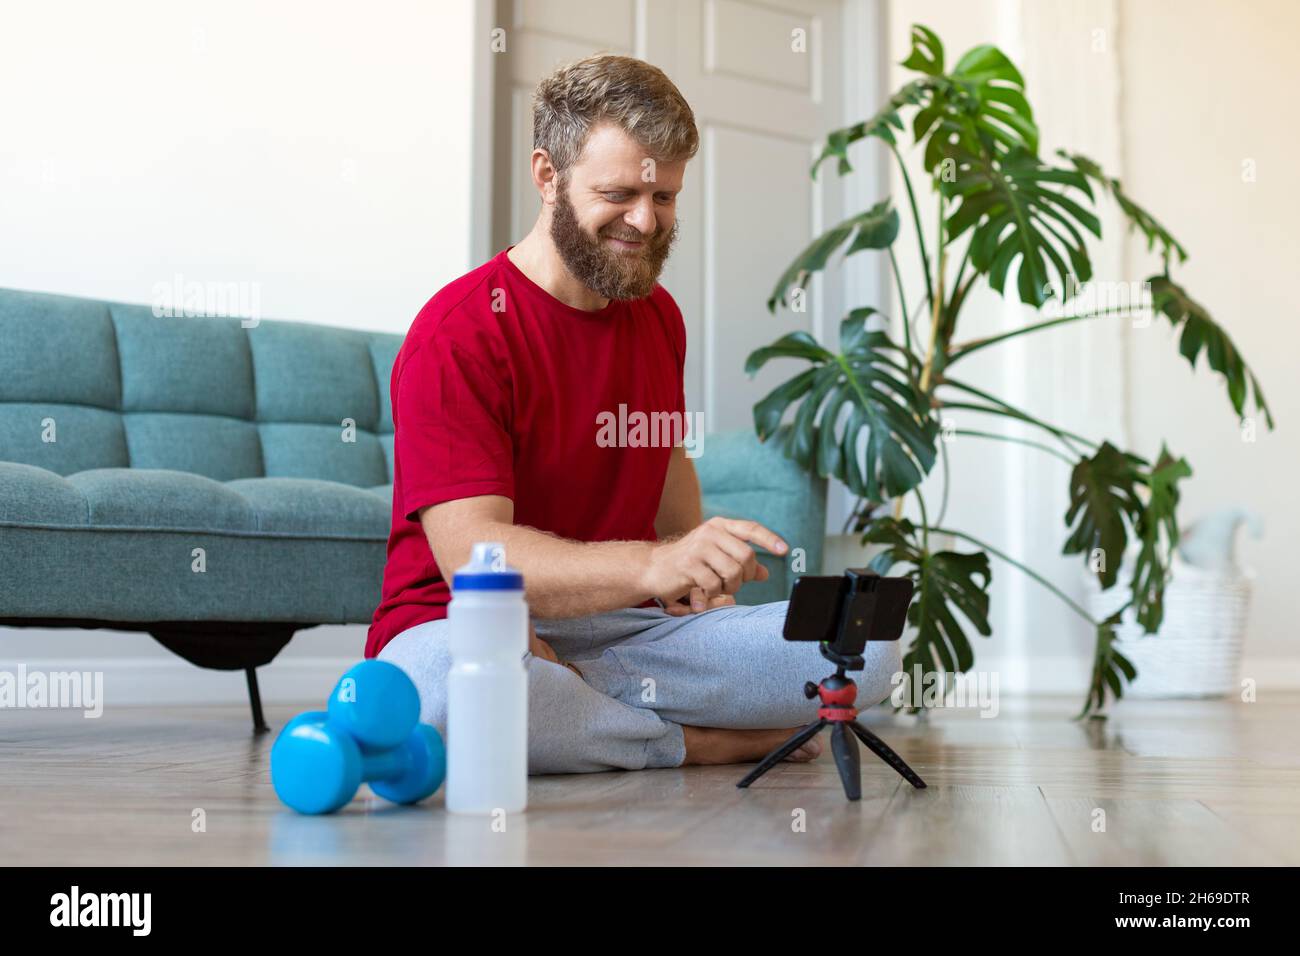 Helathy lifestyle concept - middle-aged man searches the internet for an online home workout guide. Stock Photo